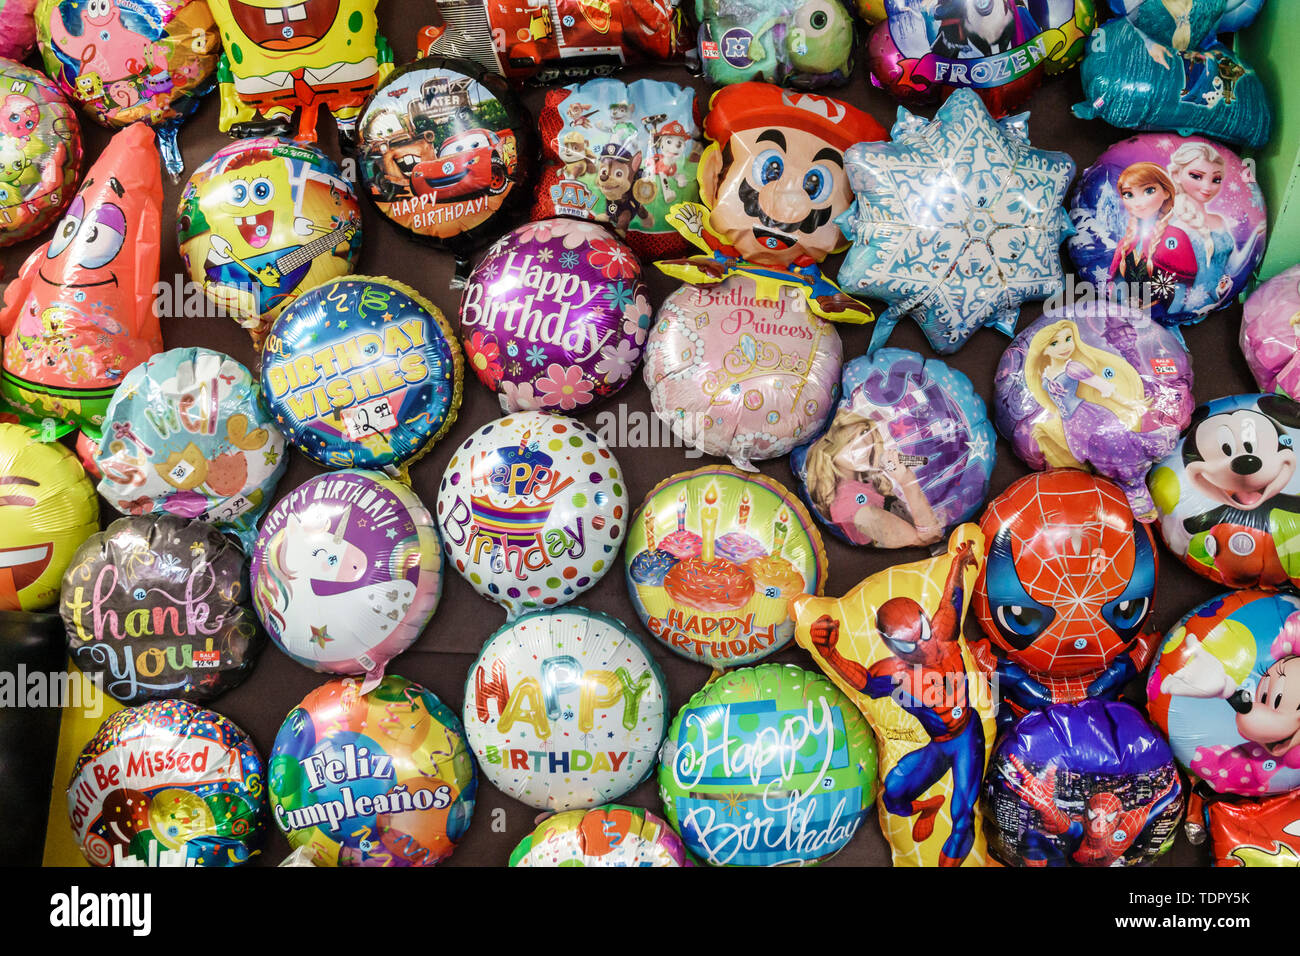 Immokalee Florida,Mimi's Pinatas & Party Rentals,inside interior,party supply store,colorful display sale,mylar balloons,special occasions,birthday,FL Stock Photo